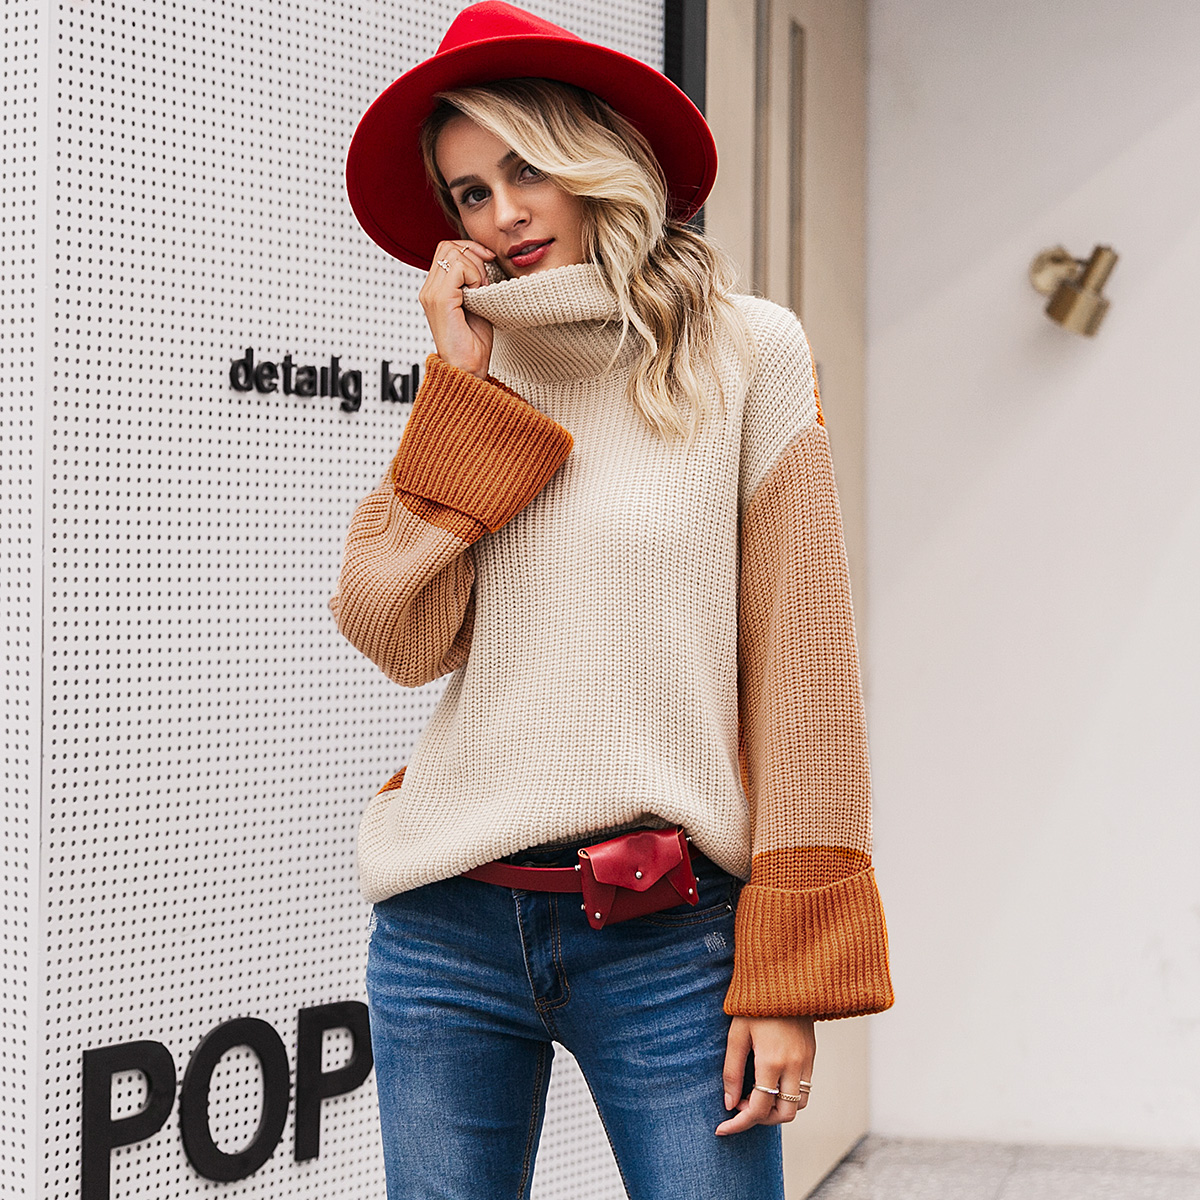 2019 new sleeve stitching sweater fashion women39s wholesalepicture15